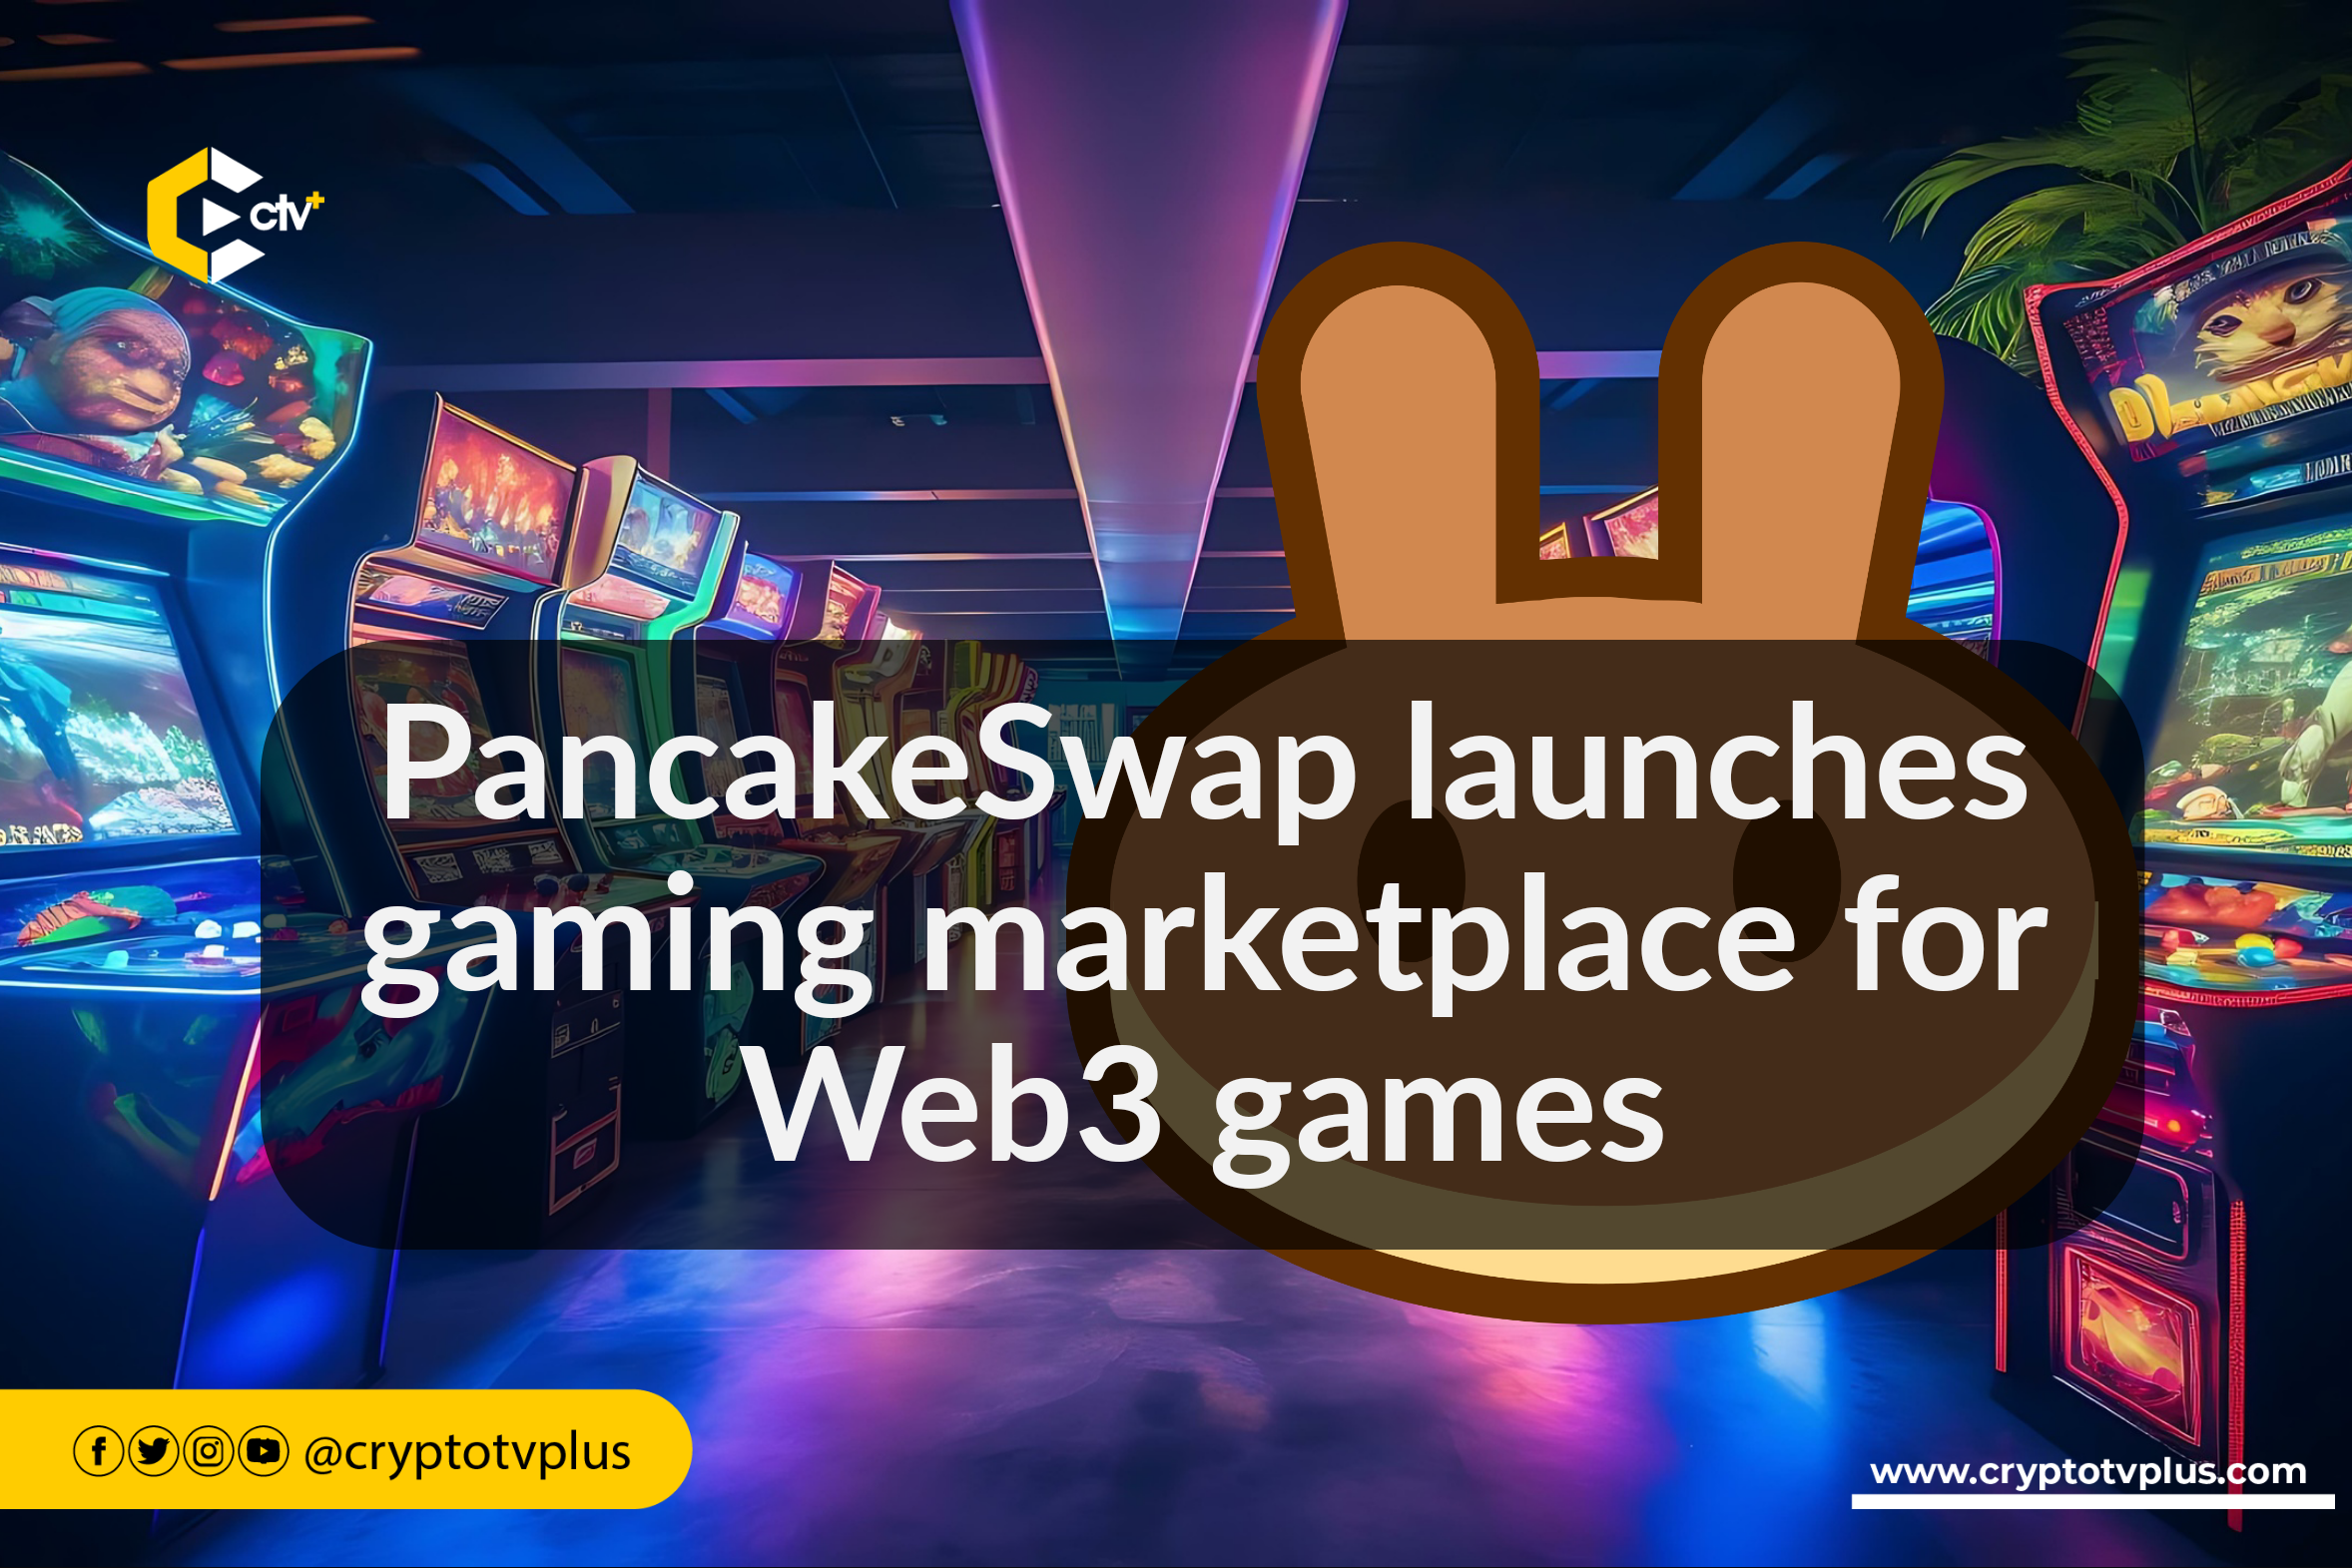 PancakeSwap launches a GameFi marketplace, attracting gamers & developers. Swap BEP-20 tokens instantly on PancakeSwap, no registration needed. PancakeSwap marketplace web3 games